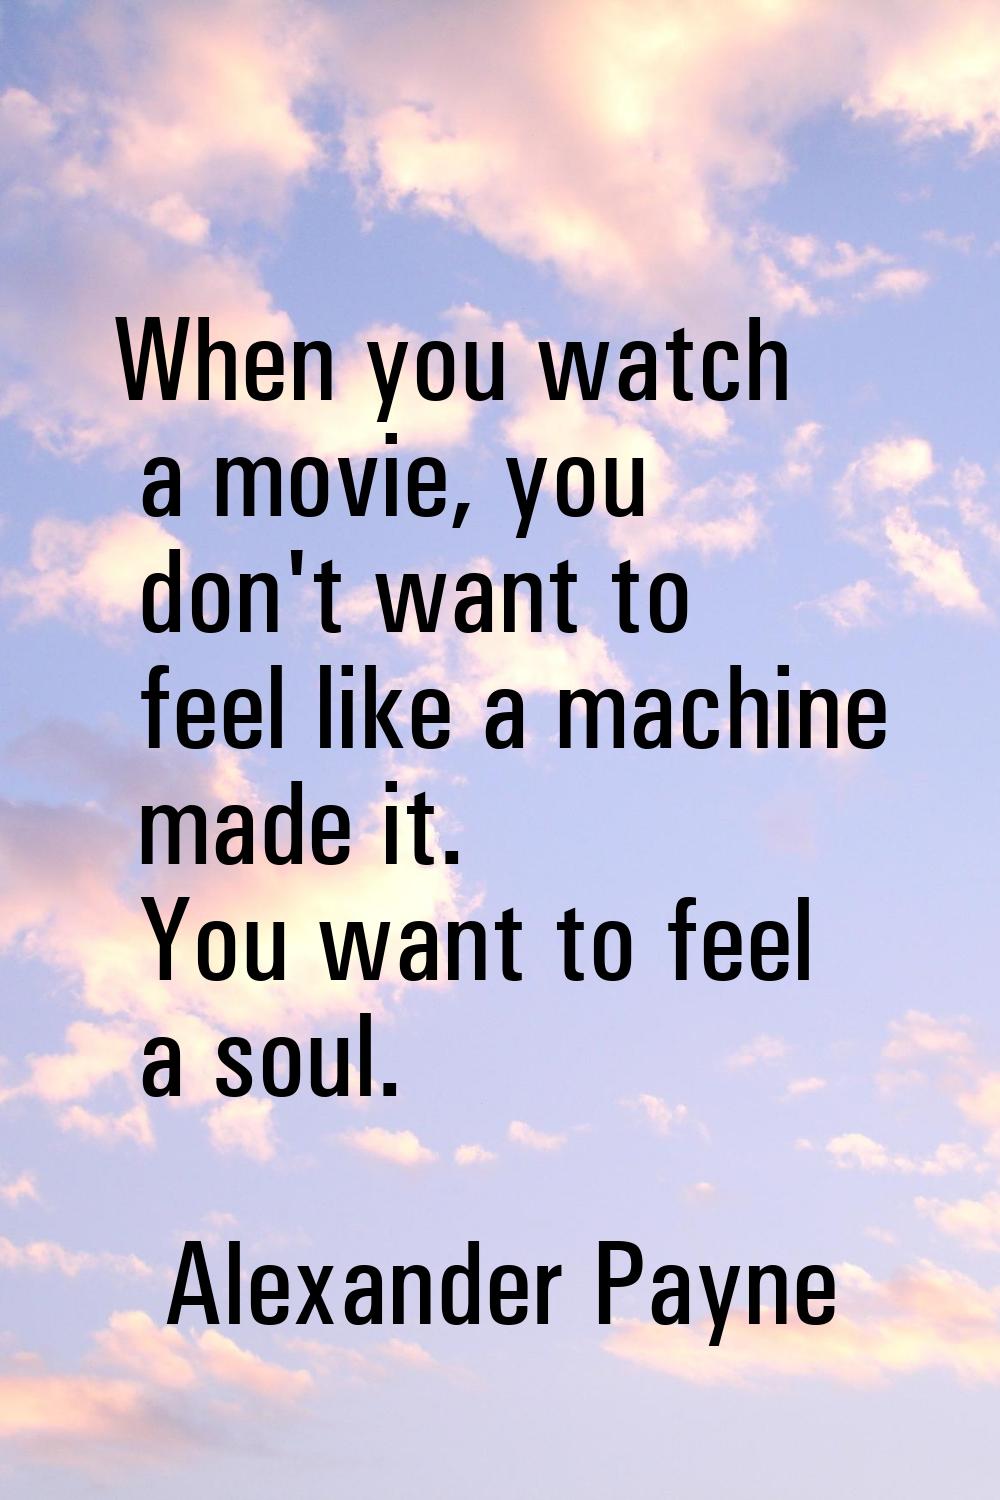 When you watch a movie, you don't want to feel like a machine made it. You want to feel a soul.